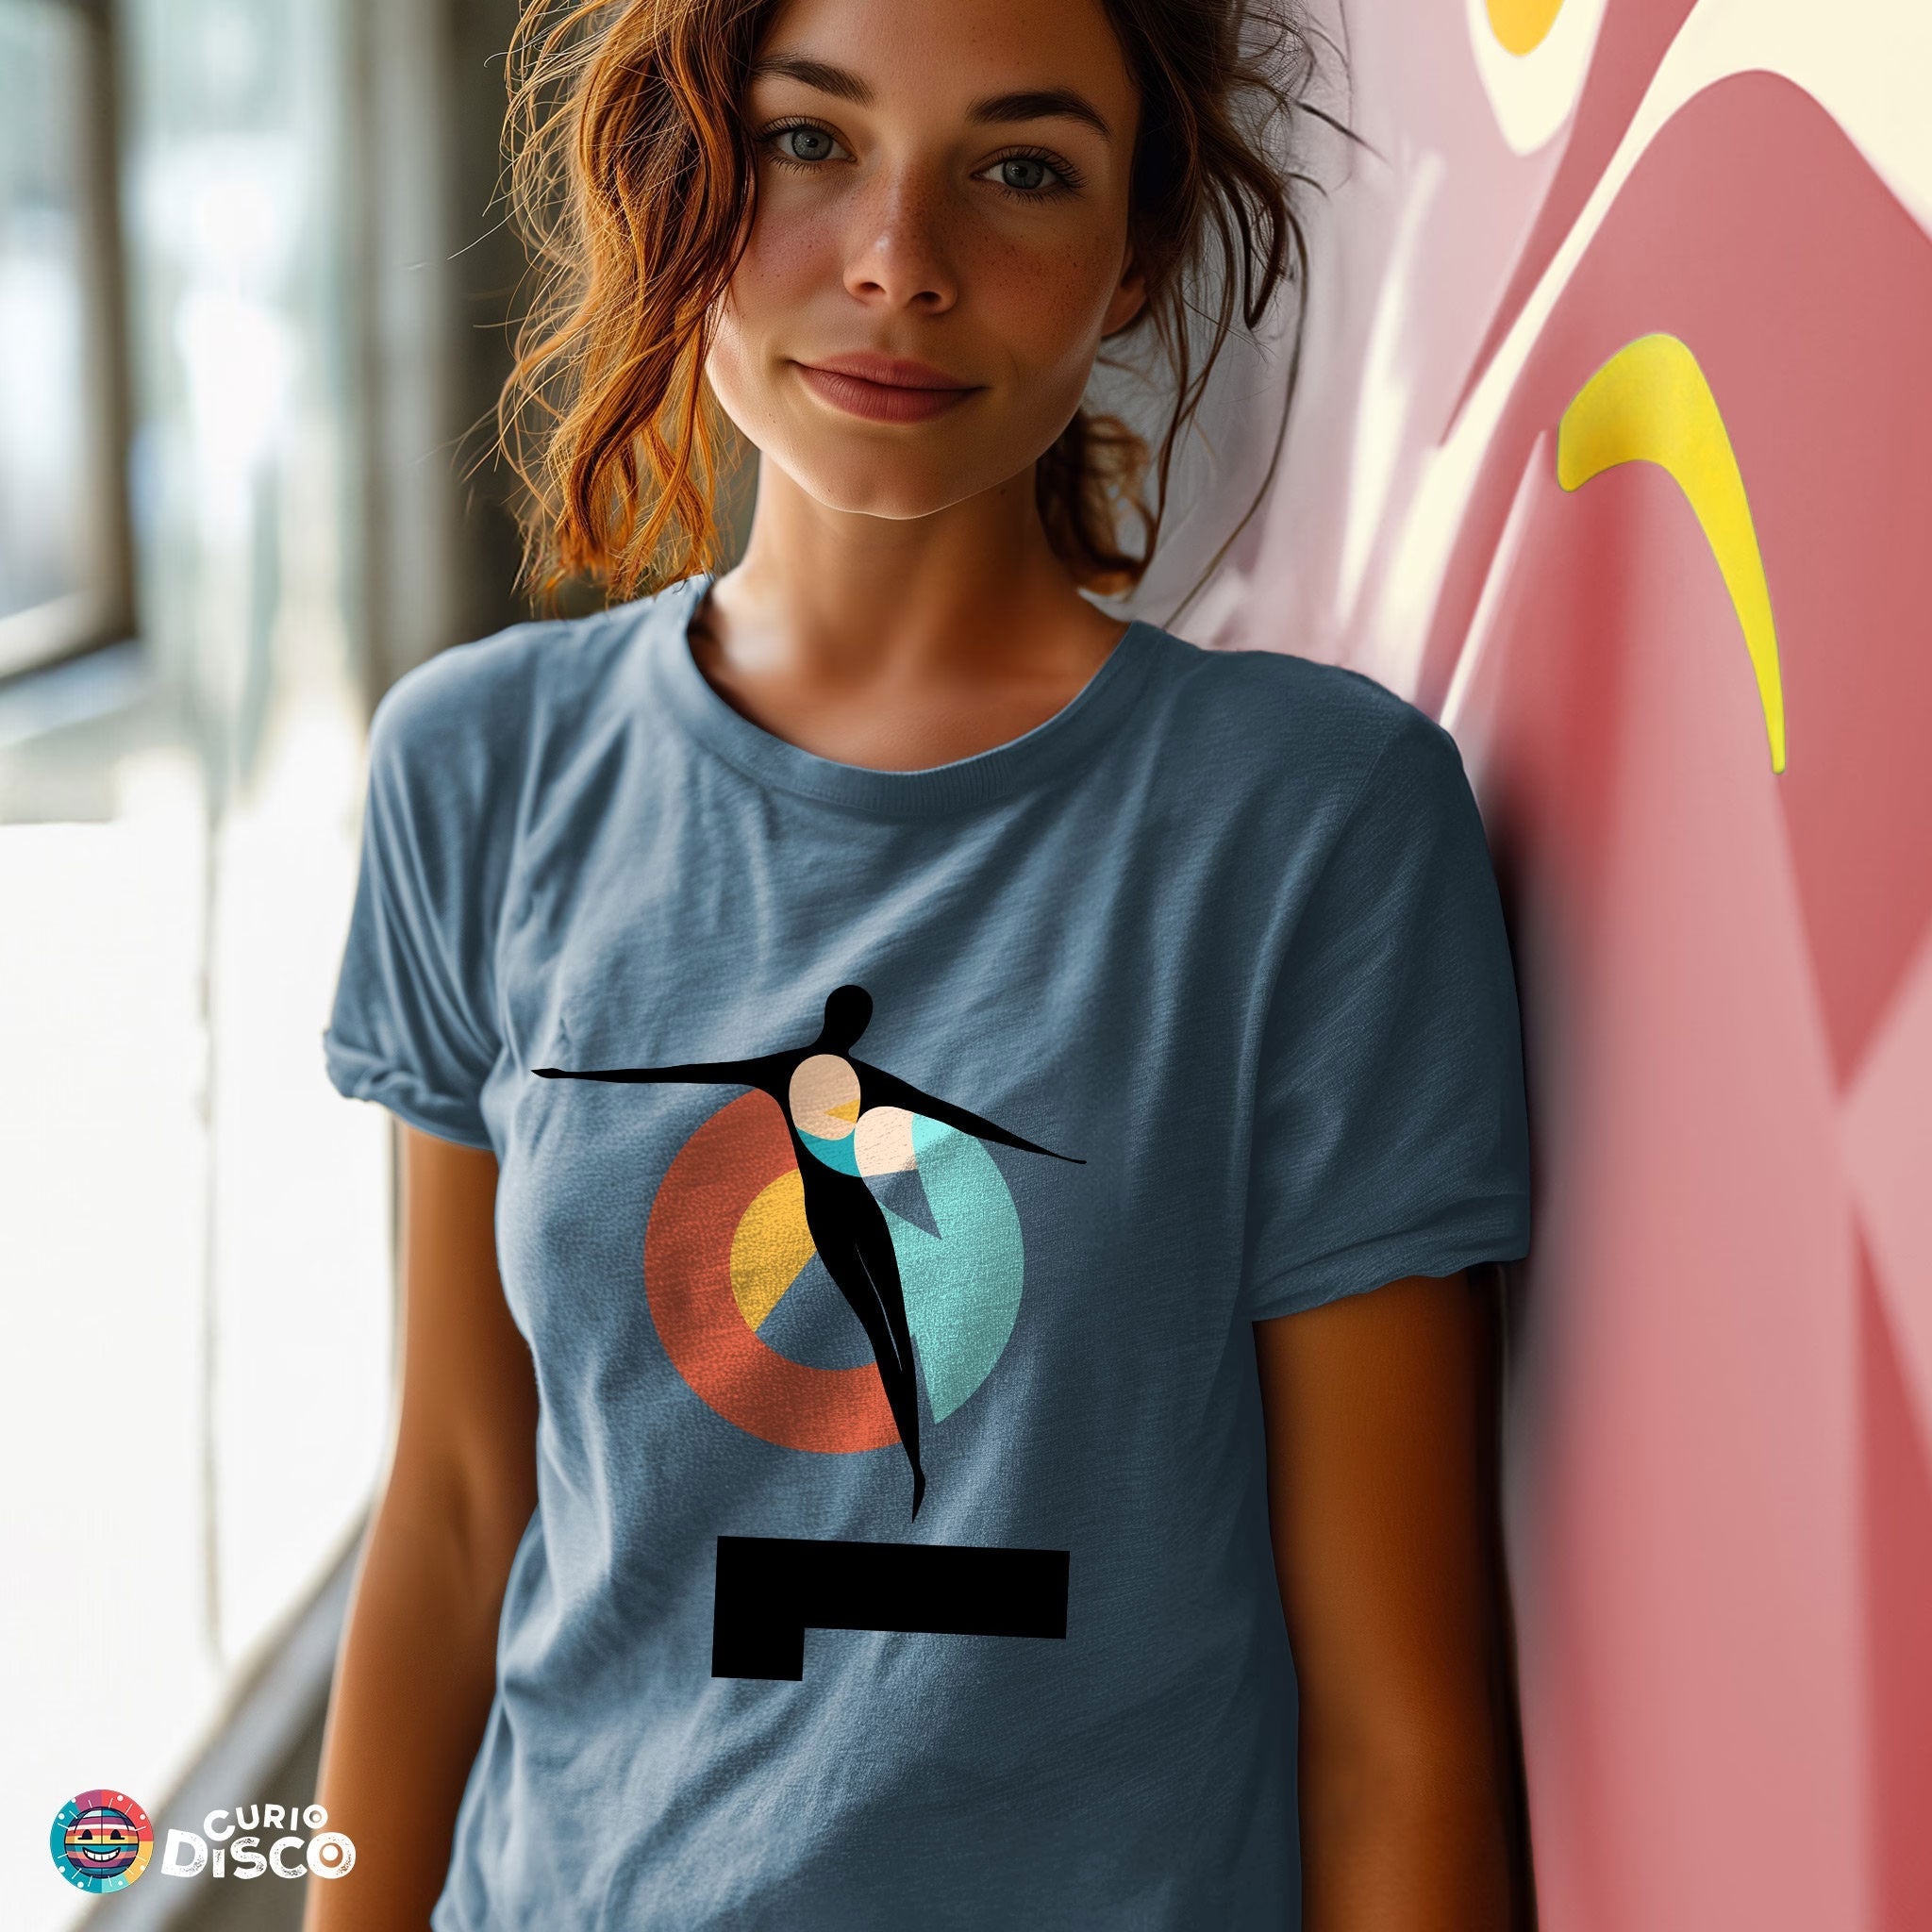 Steel blue short-sleeve T-shirt. Womens clothing designer shirt with geometric art, ladies gifts or yoga gifts for her; inspirational shirt, minimalist fashion, trending shirts style, offers inner peace relax in plus size shirts as self care gift, spiritual gifts for art lover tee